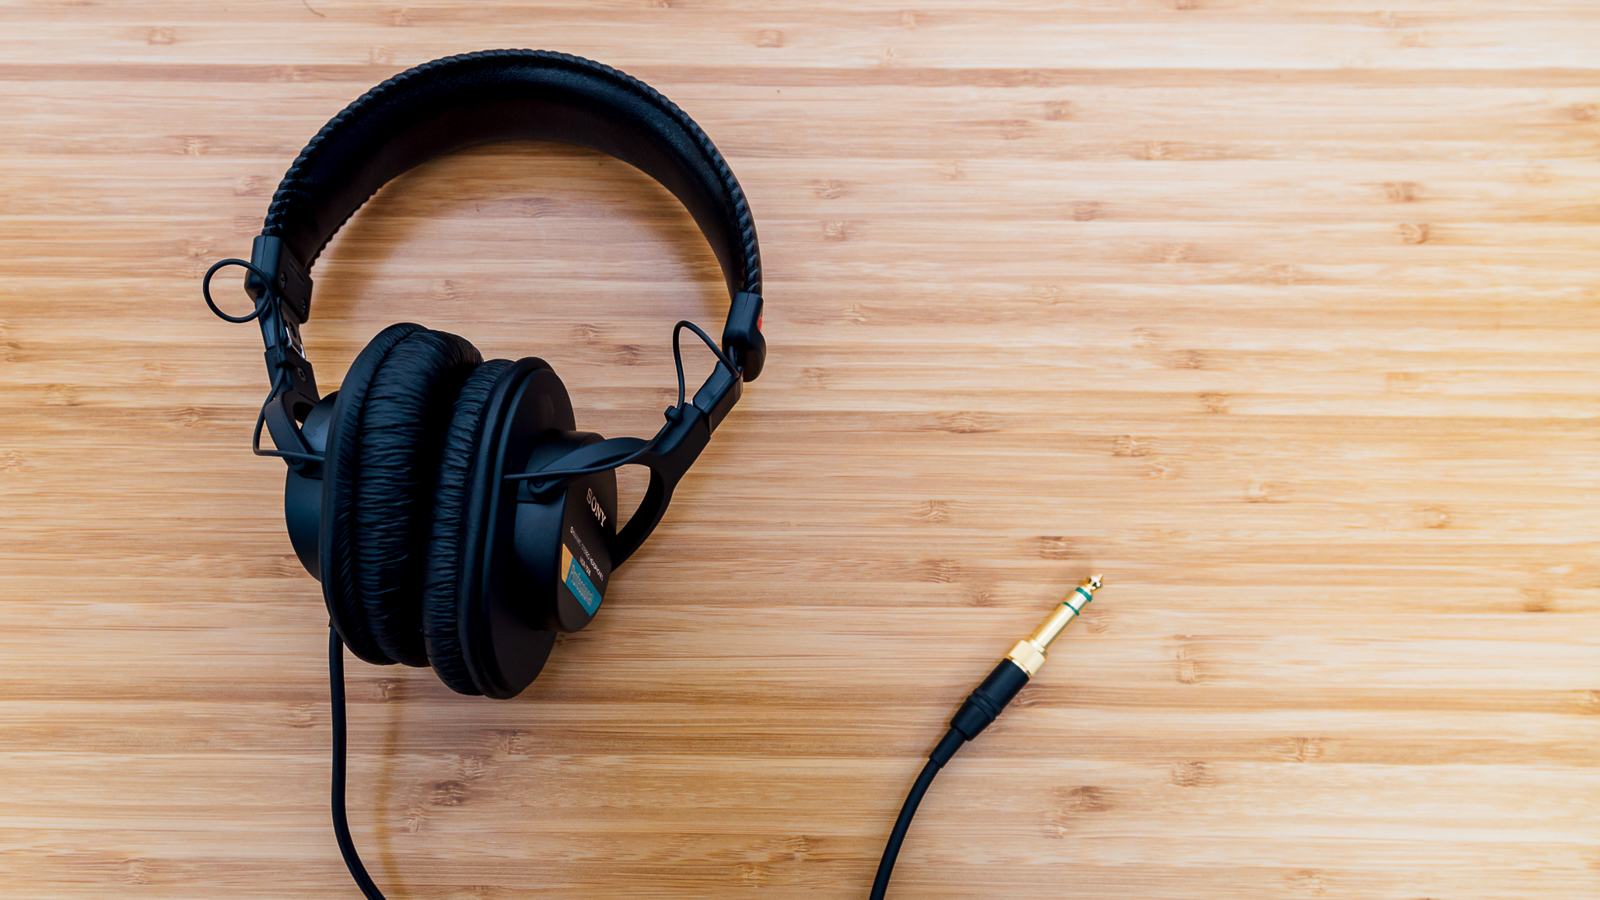 The beginner's guide to podcast listening